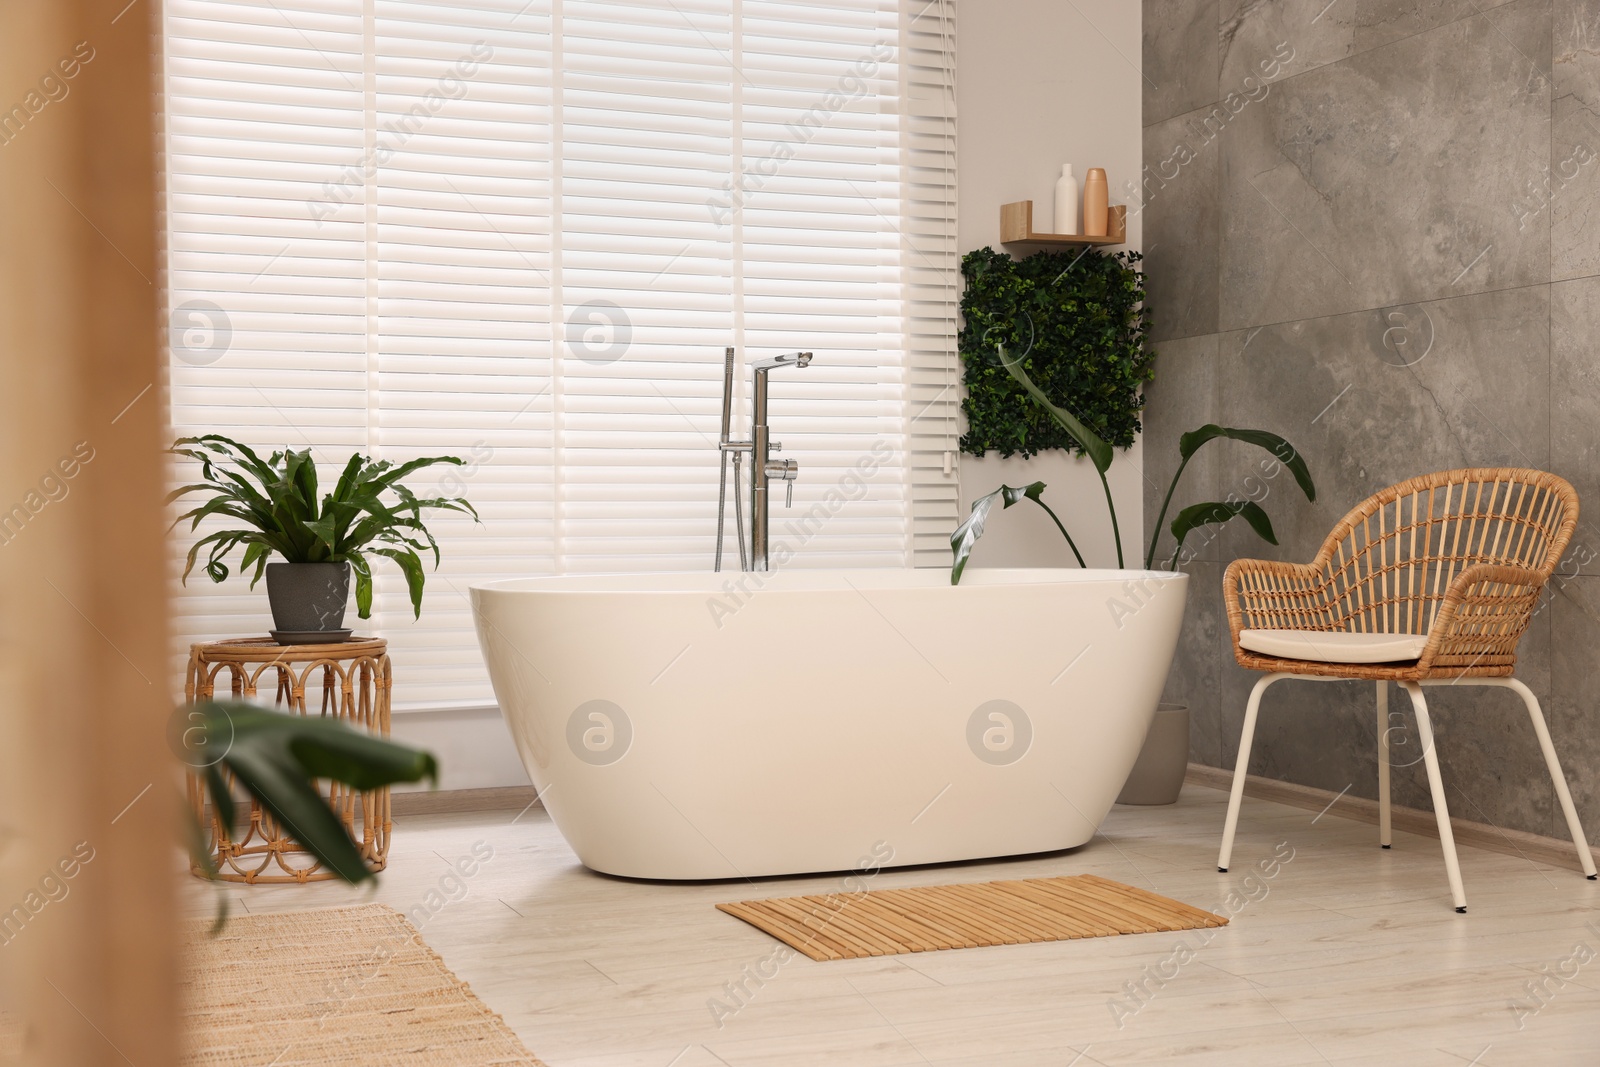 Photo of Green artificial plants and tub near window in bathroom